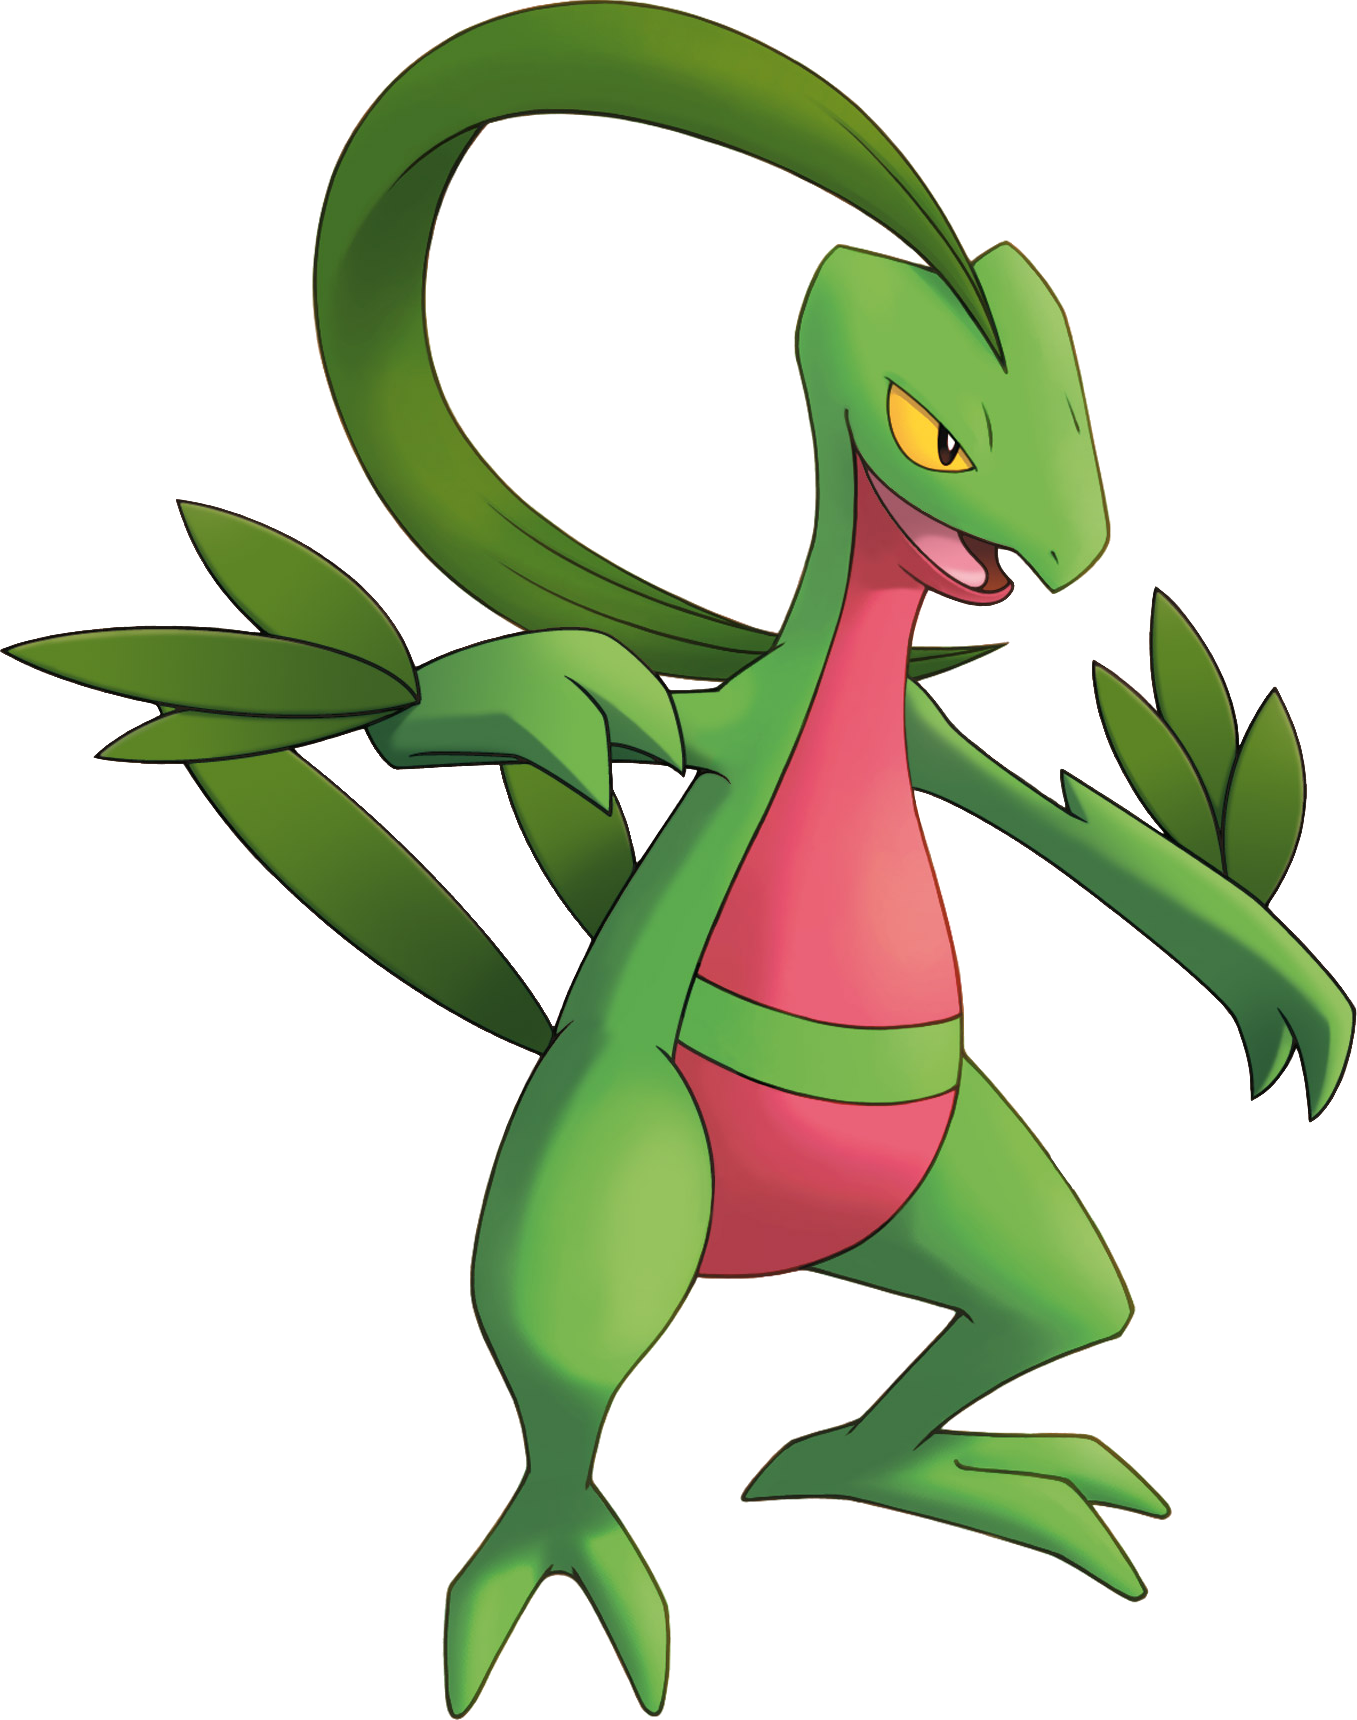 Grovyle pmd quotes - 🧡 grovyle - Transparent Images For Free Download.